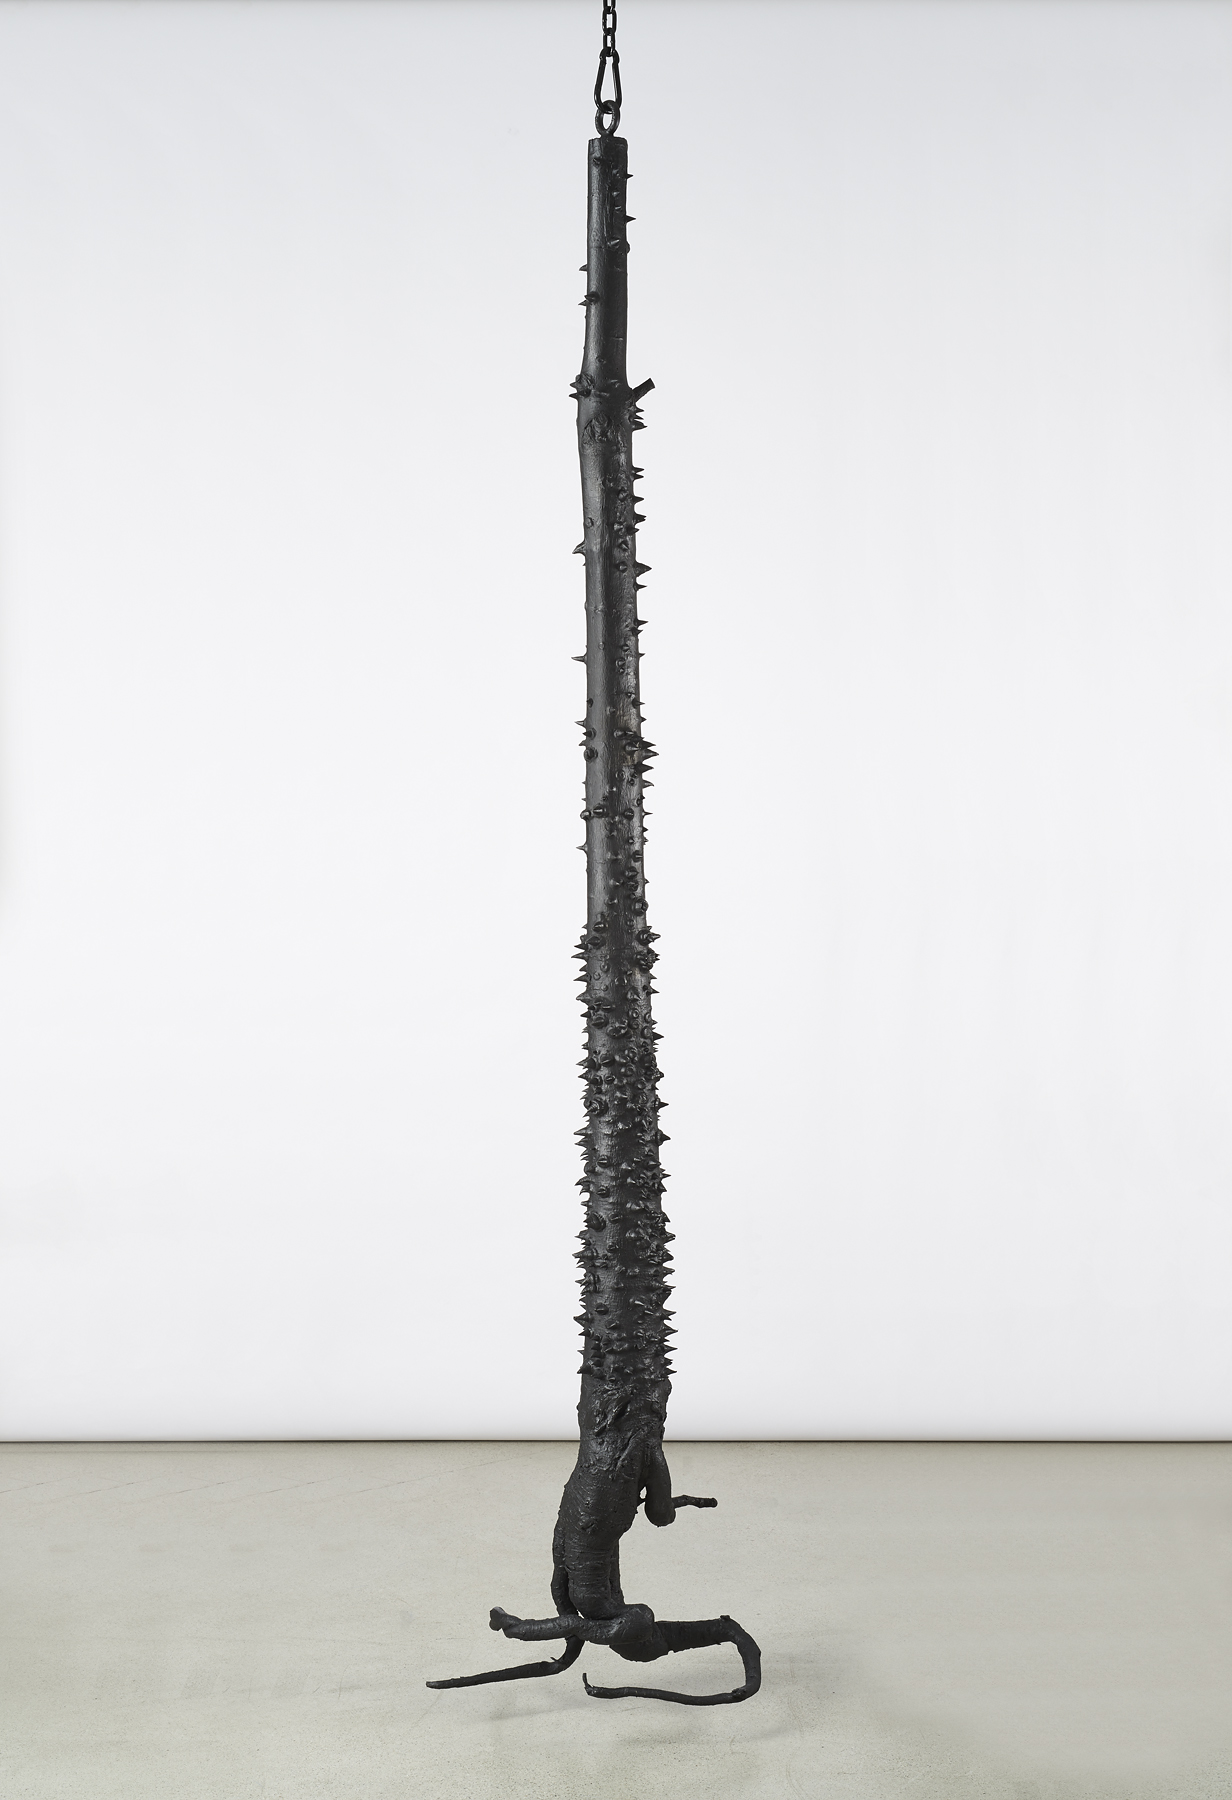  Davina Semo,  Exotica , 2019, Patinated cast bronze, powder-coated chain, hardware, Trunk: 94 inches / 238.76 cm tall, overall dimensions variable 